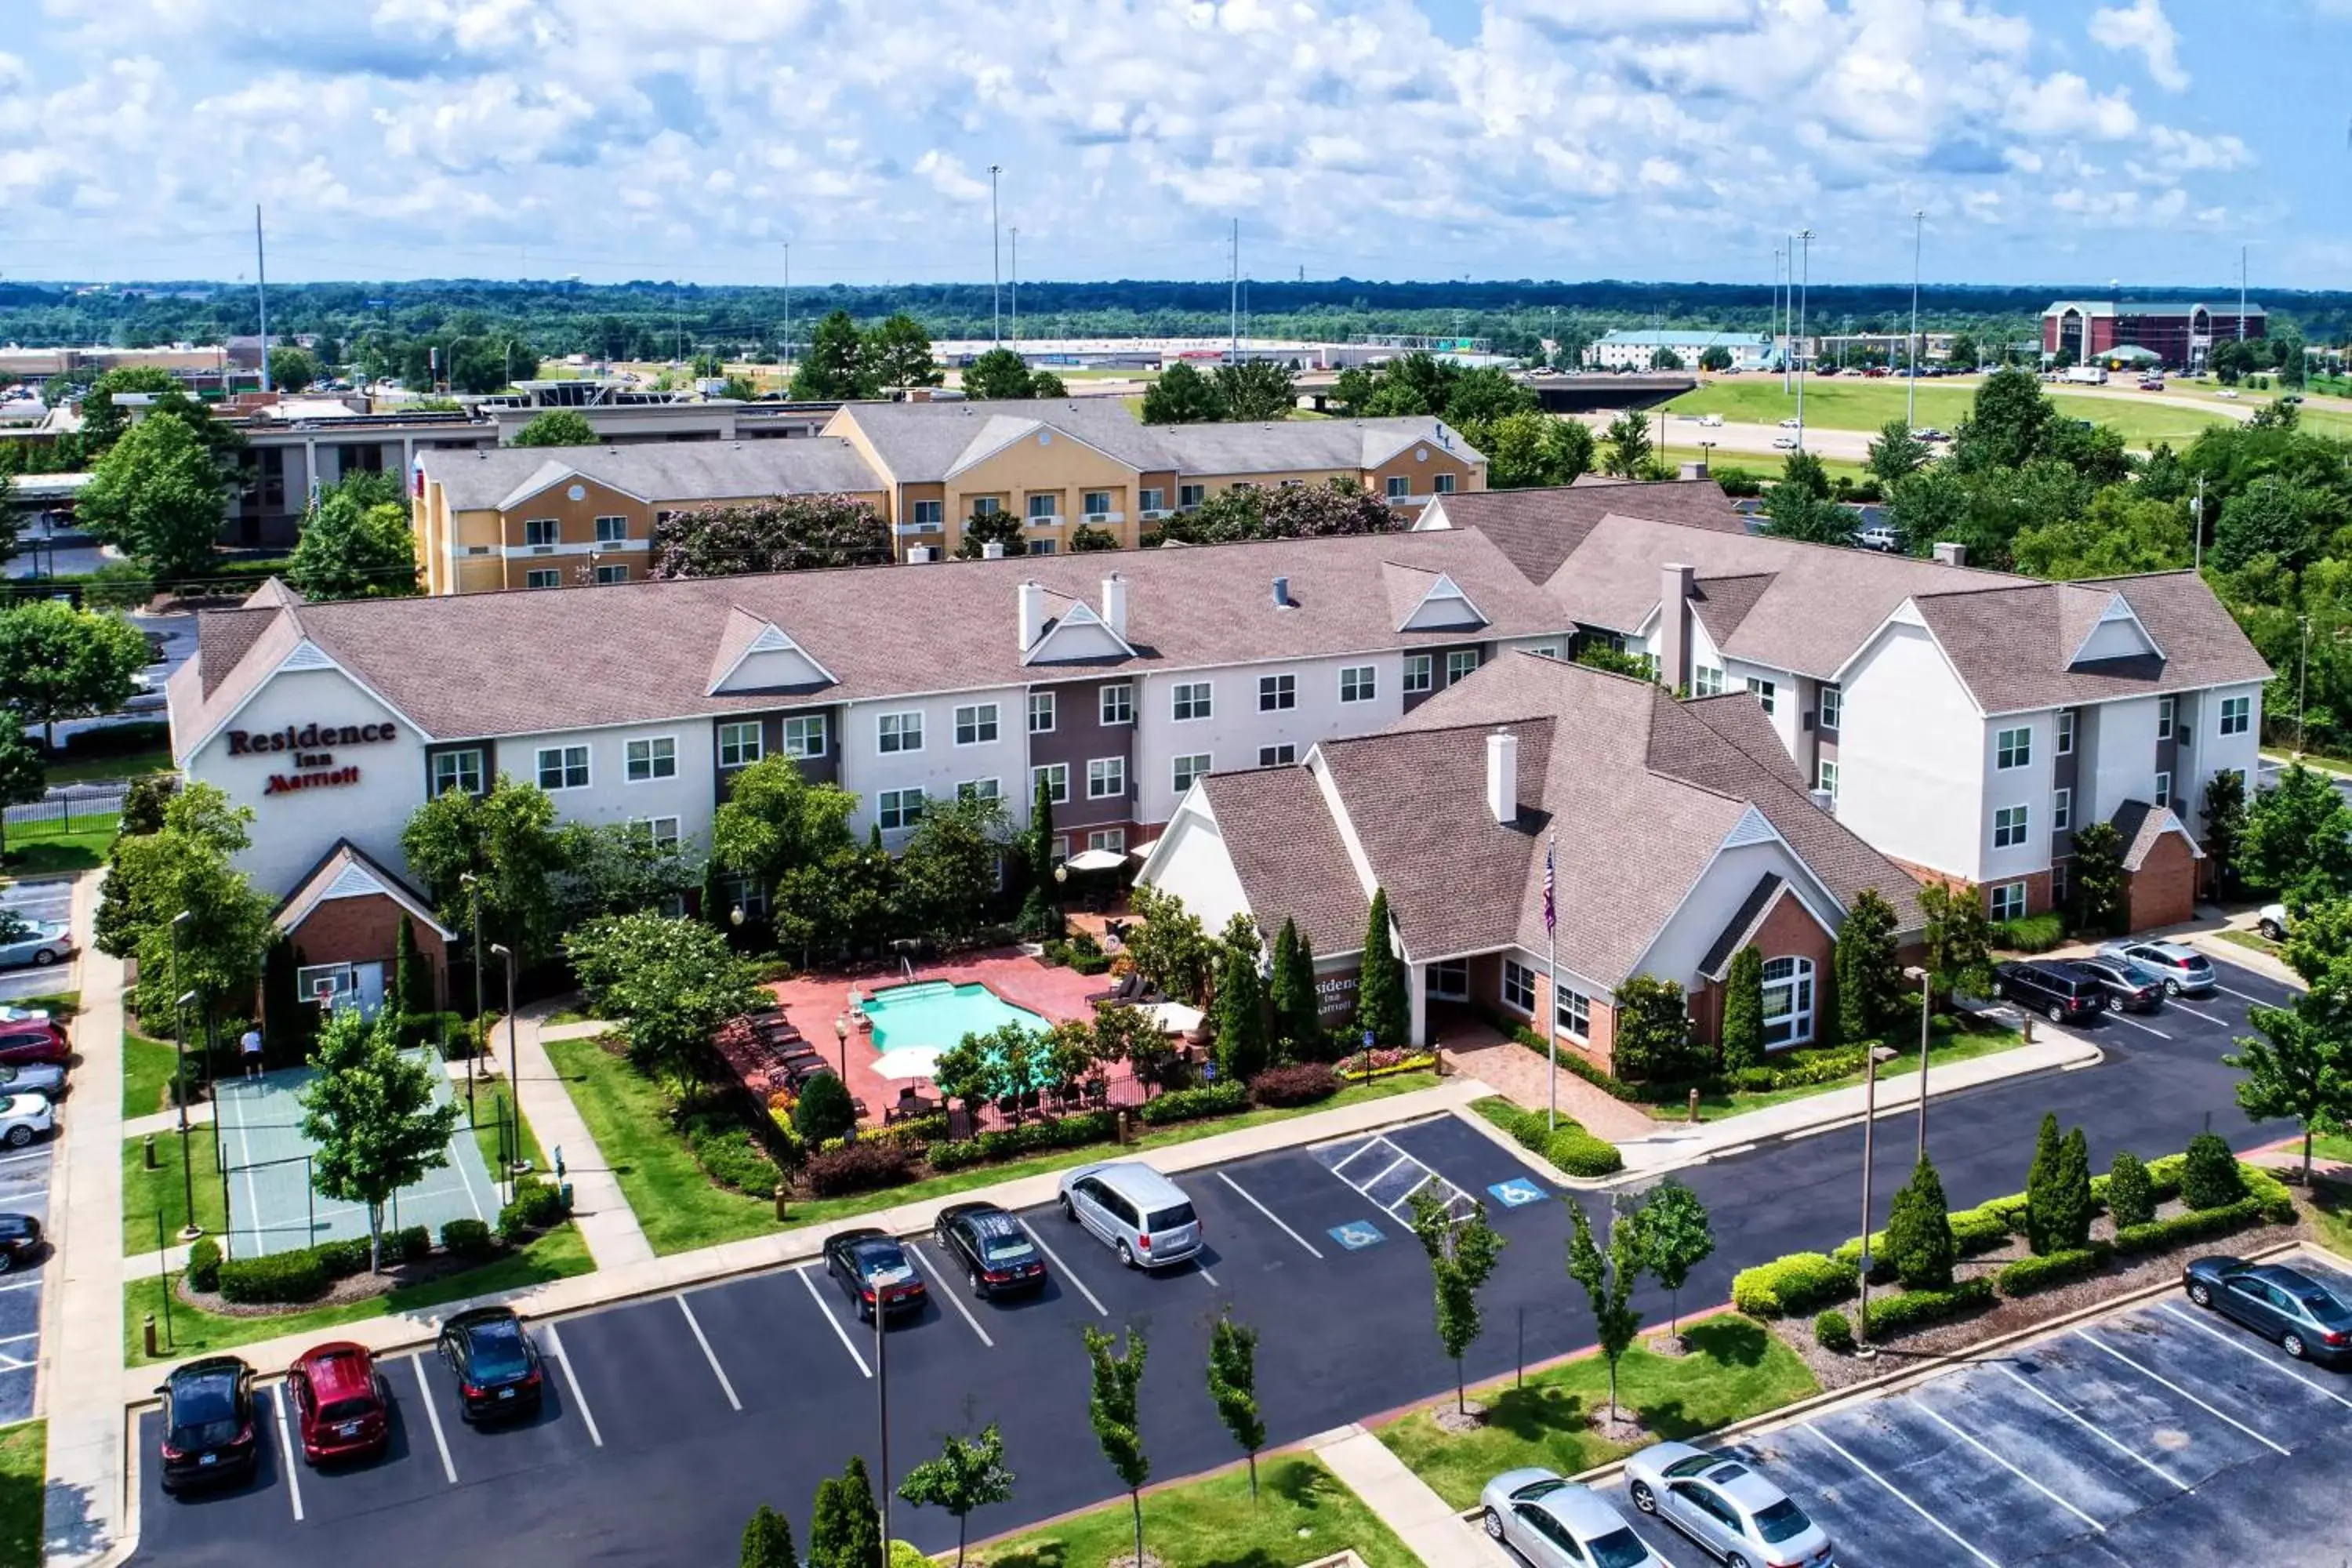 Property building, Bird's-eye View in Residence Inn by Marriott Memphis Southaven